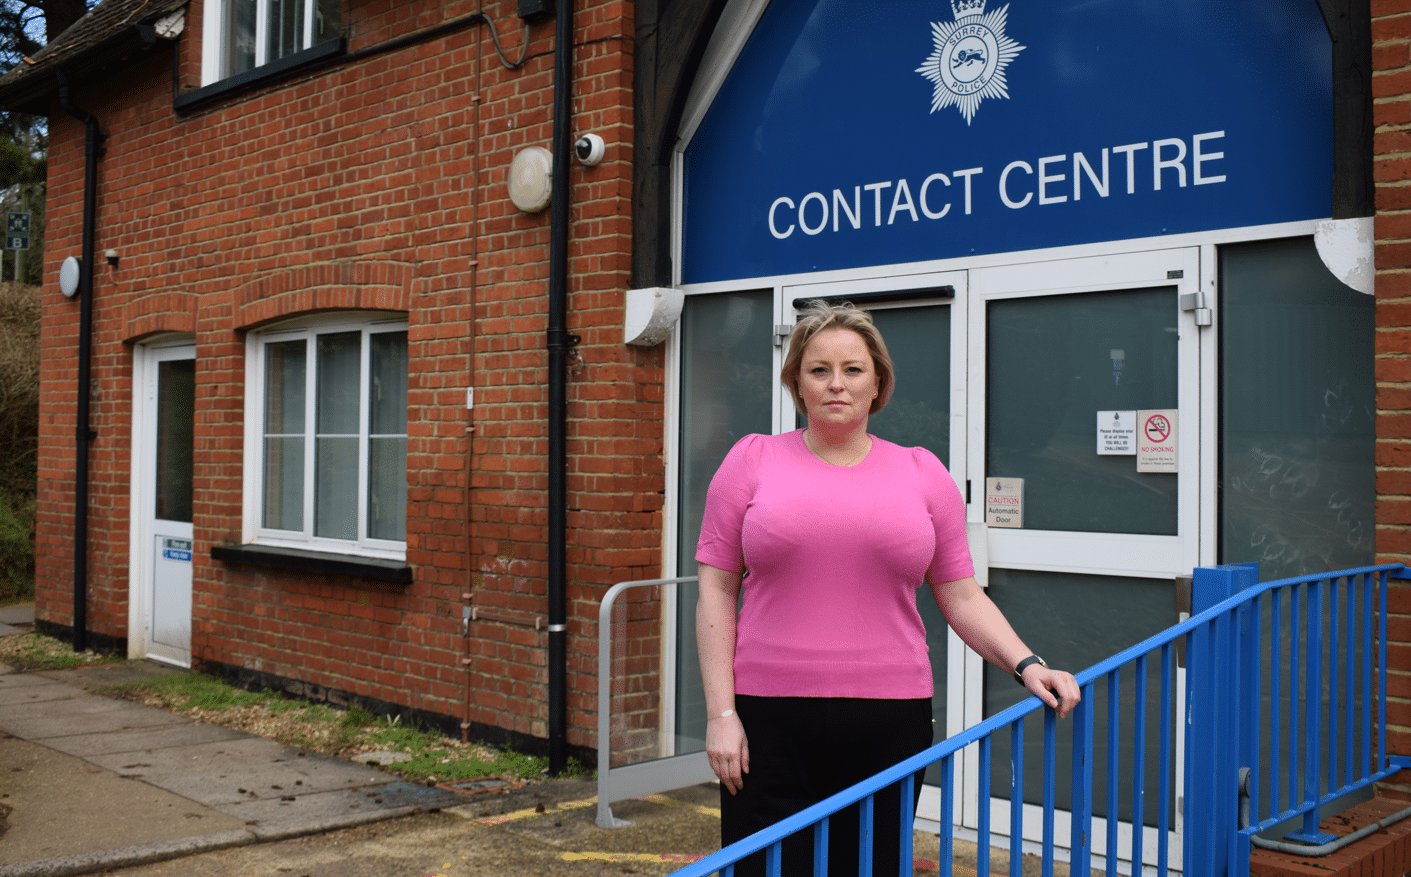 Police and Crime Commisisoner for Surrey Lisa Townsend standing outside the Surrey Police Contact Centre with 'Contact Centre' visible on building sign behind her.